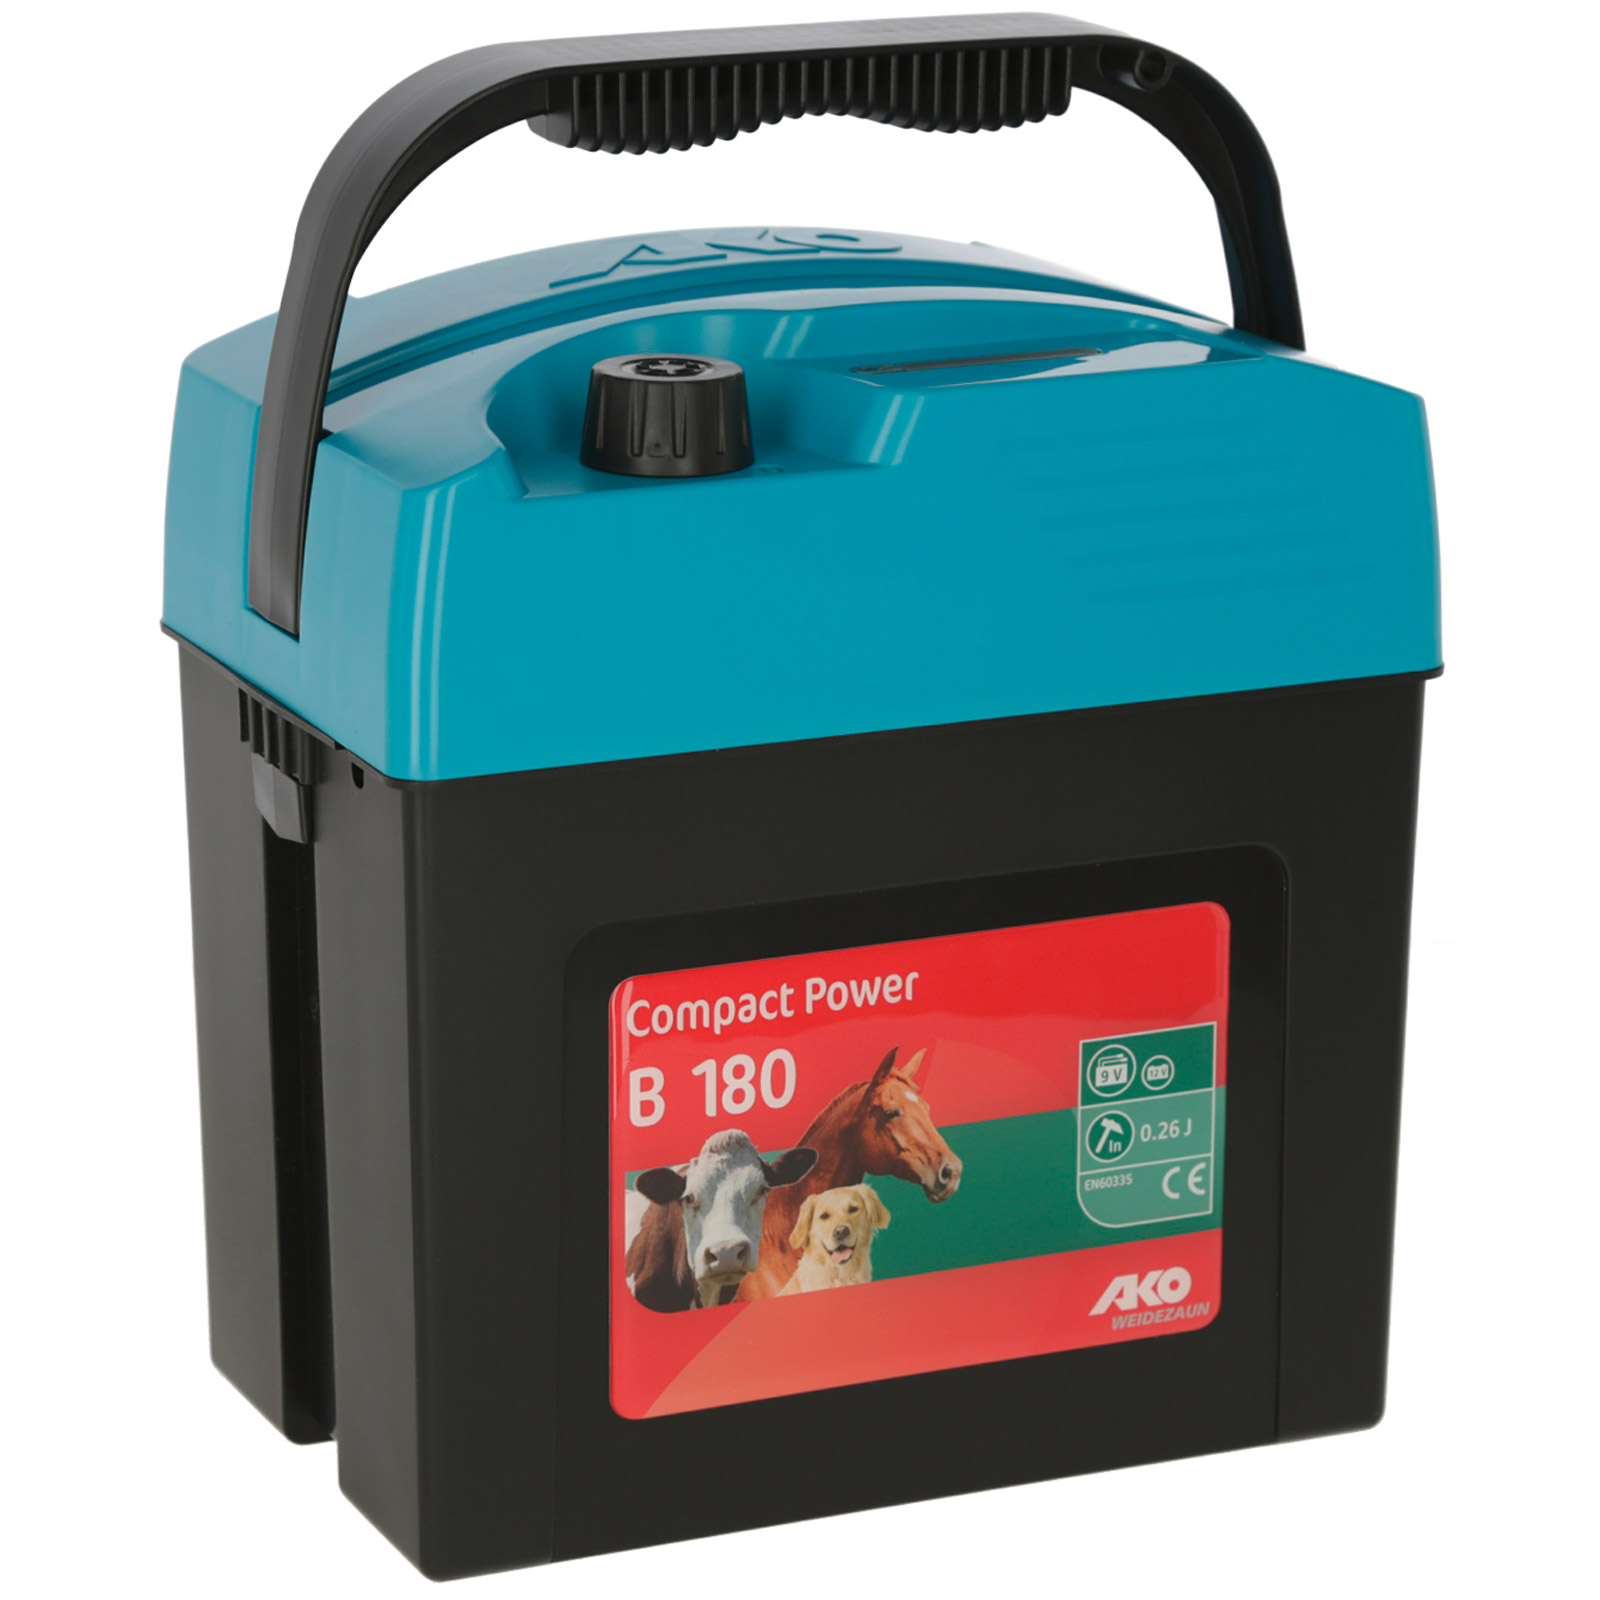 AKO Compact Power B 180 Electric fence energiser 9V, 0.26 Joule, blue